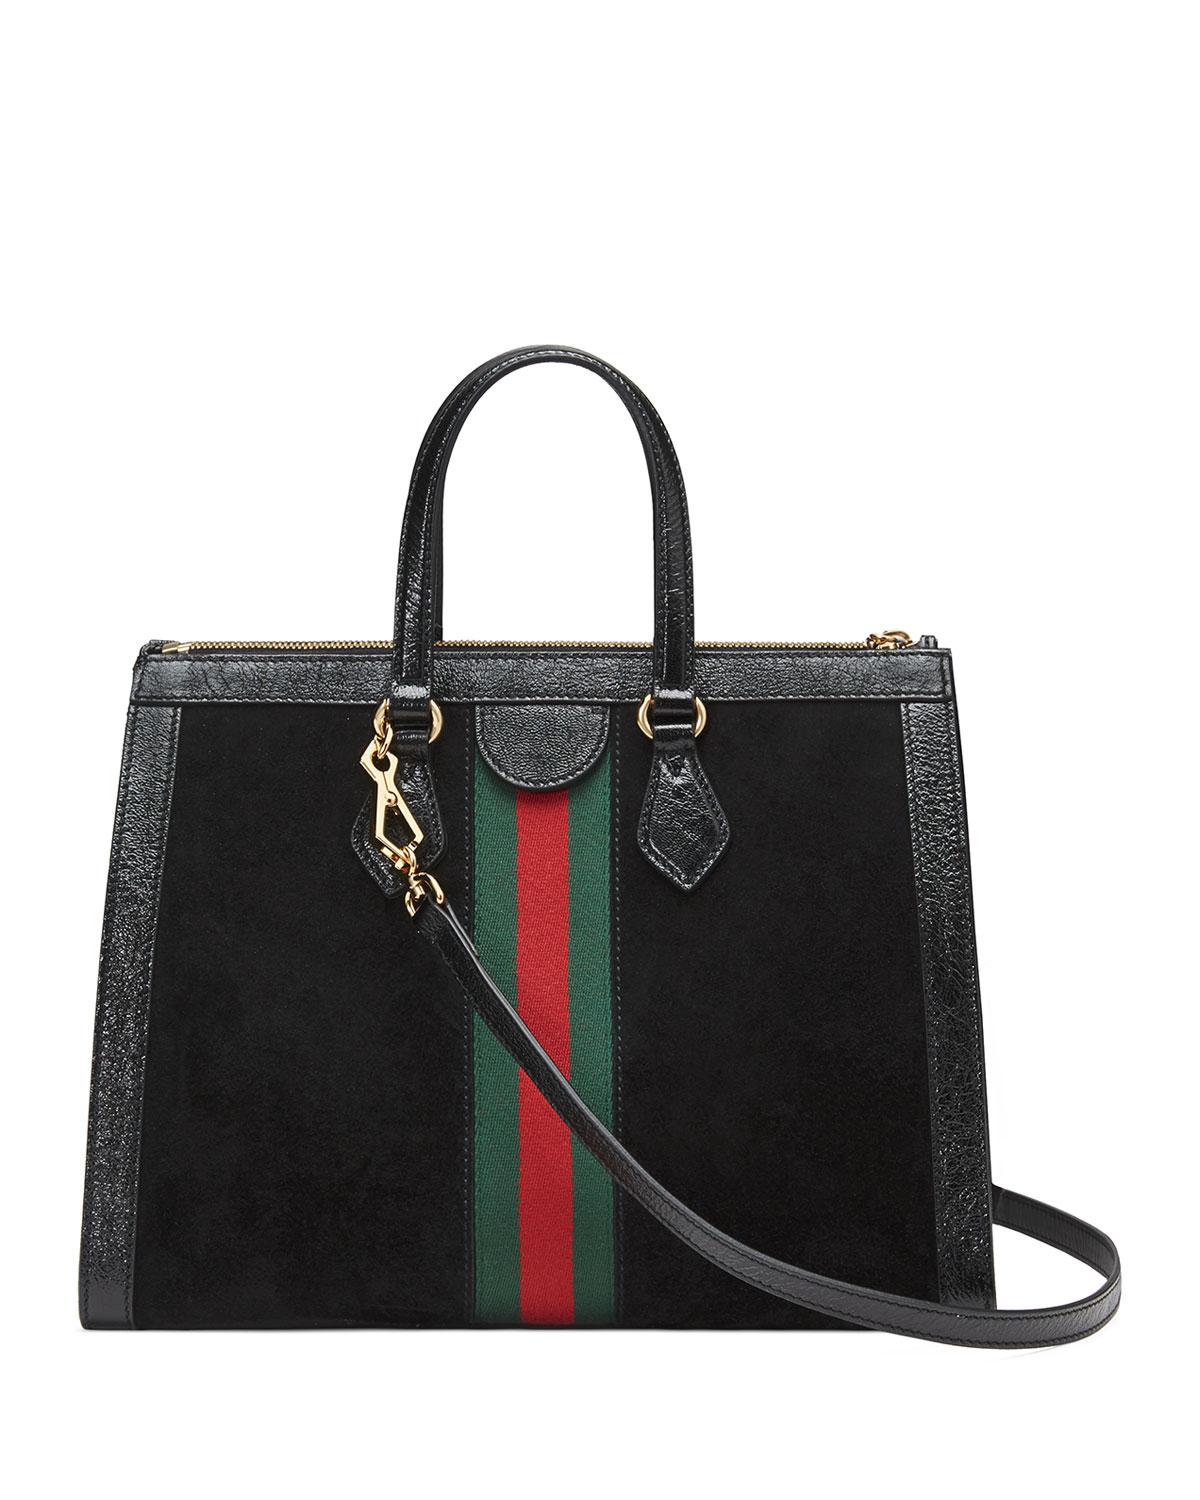 Gucci Ophidia Web Suede Top-handle Tote Bag in Black - Lyst